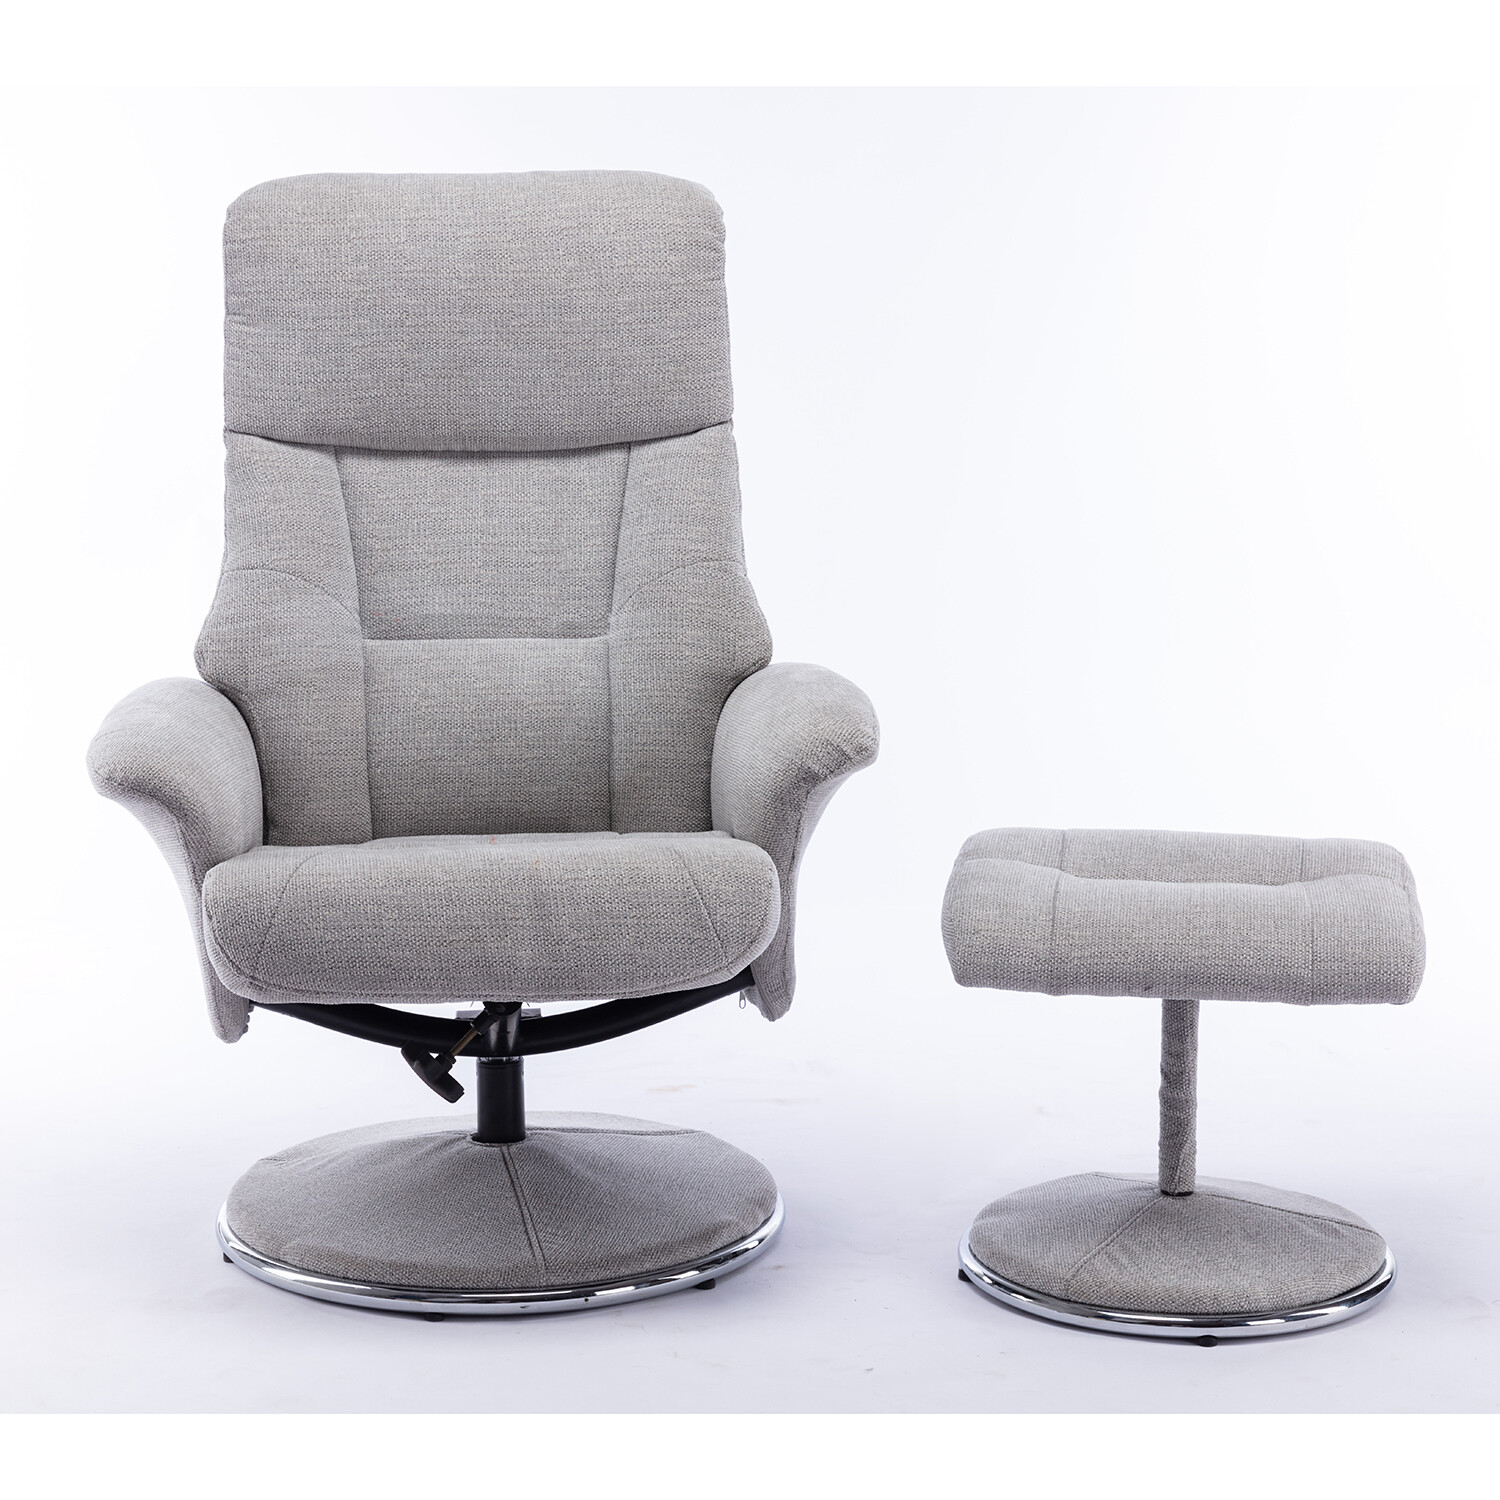 Madrid Grey Fabric Swivel TV Chair with Footrest Image 2